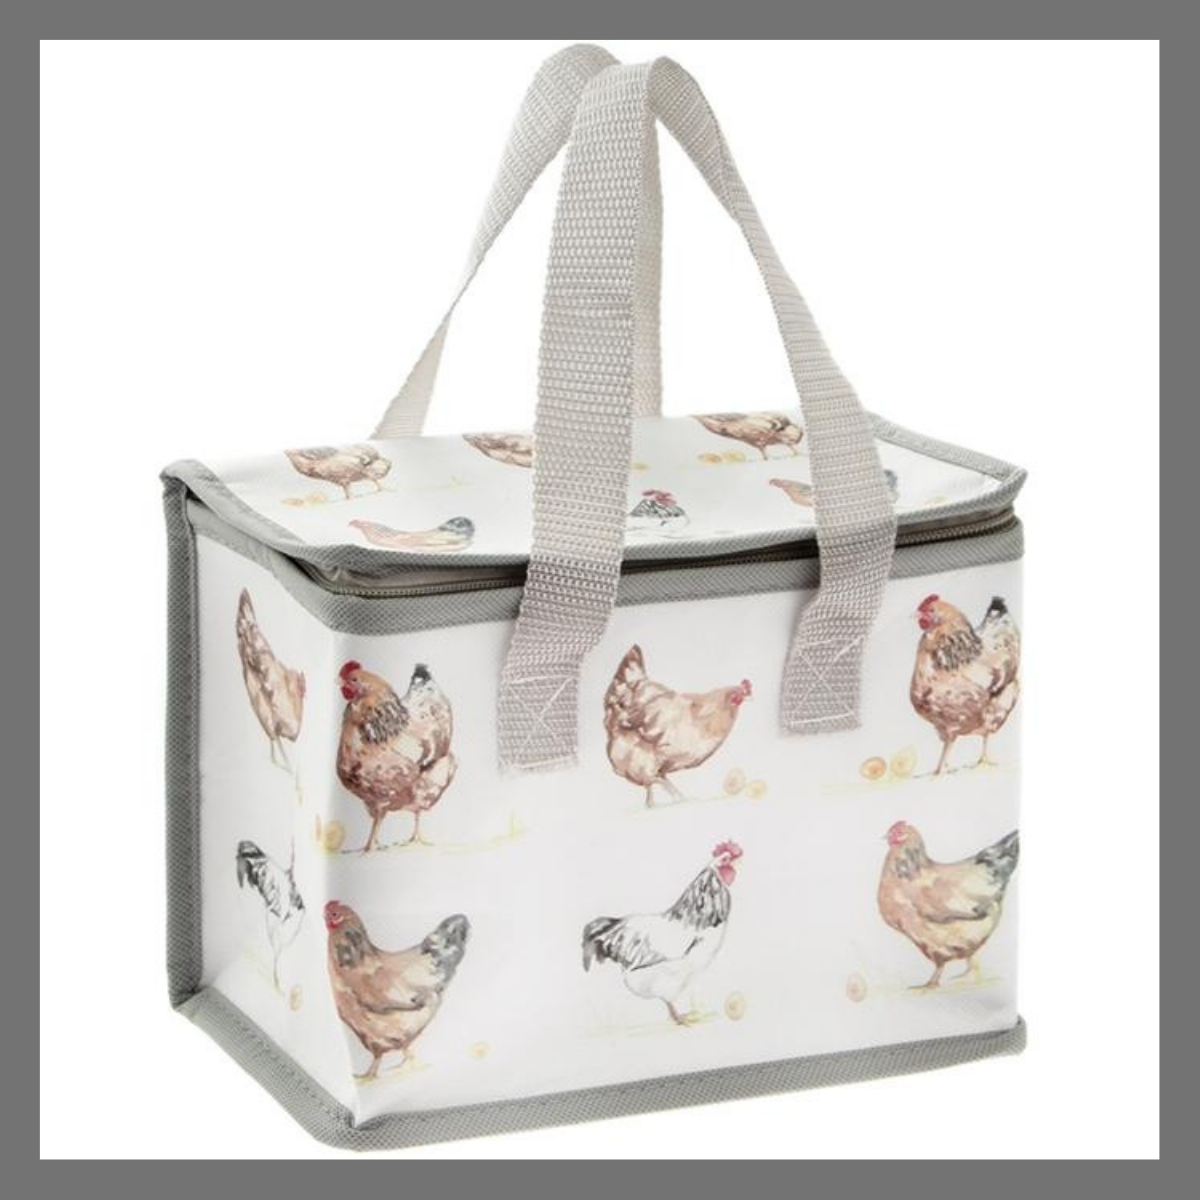 Cooler Lunch Bag - Chickens